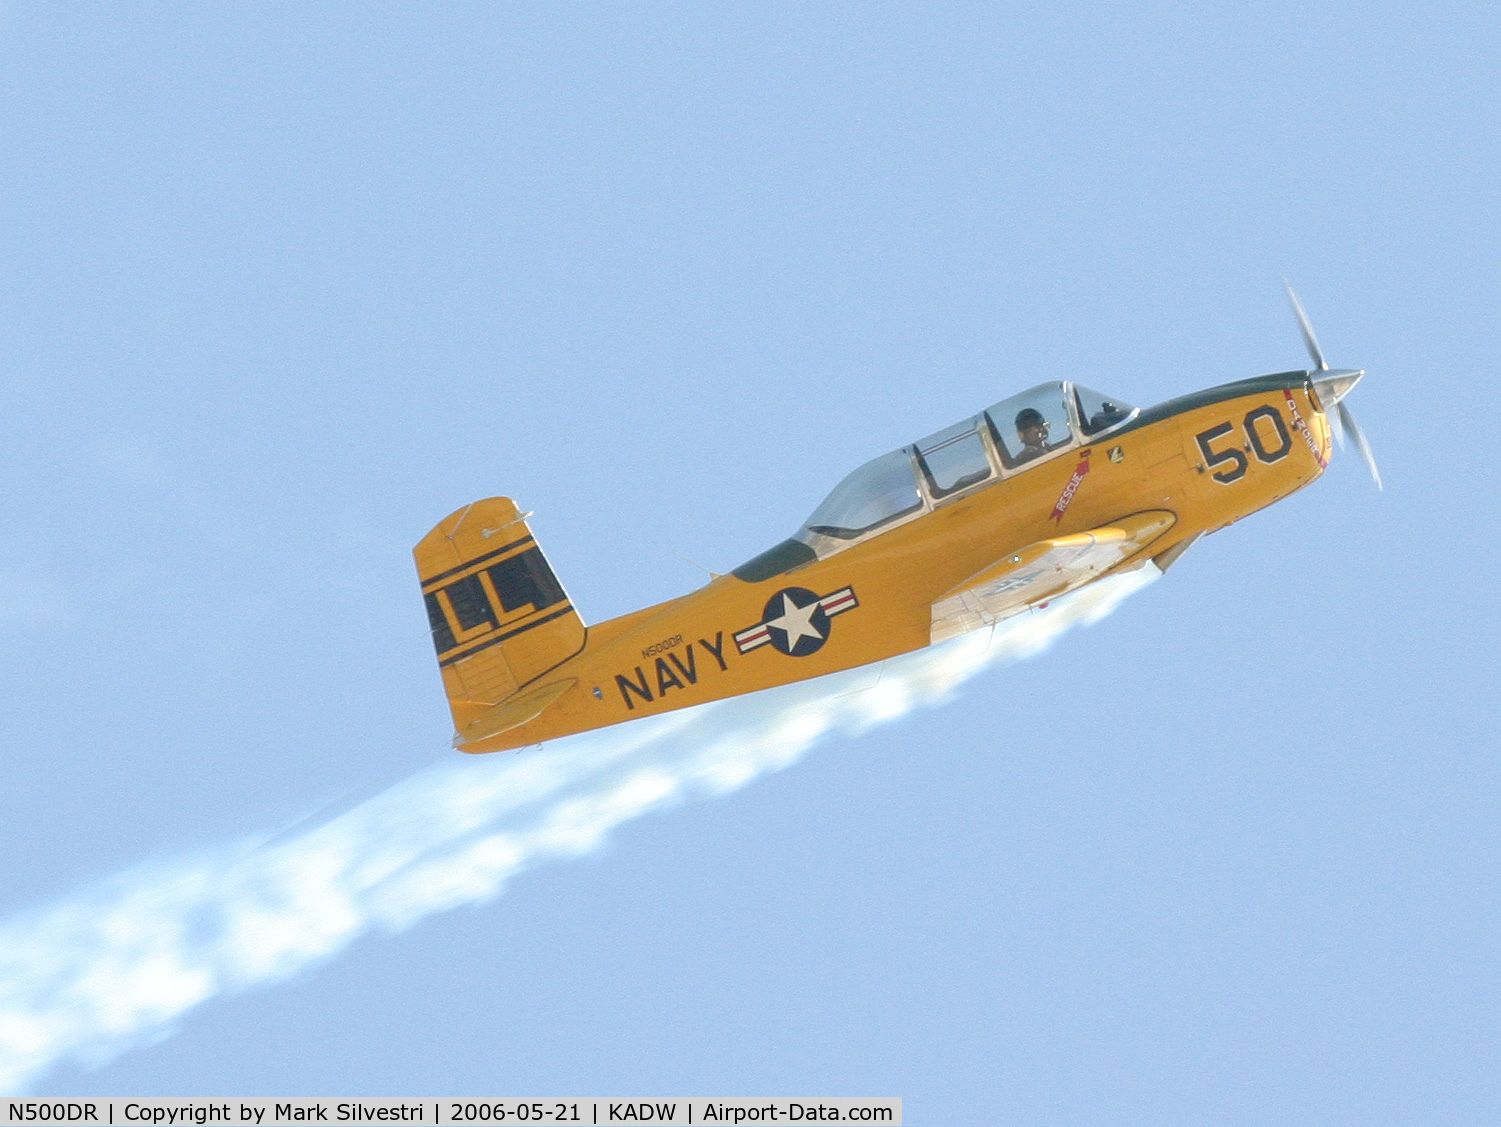 N500DR, 1954 Beech T-34A (A45) Mentor Mentor C/N G-31, Andrews AFB 2006